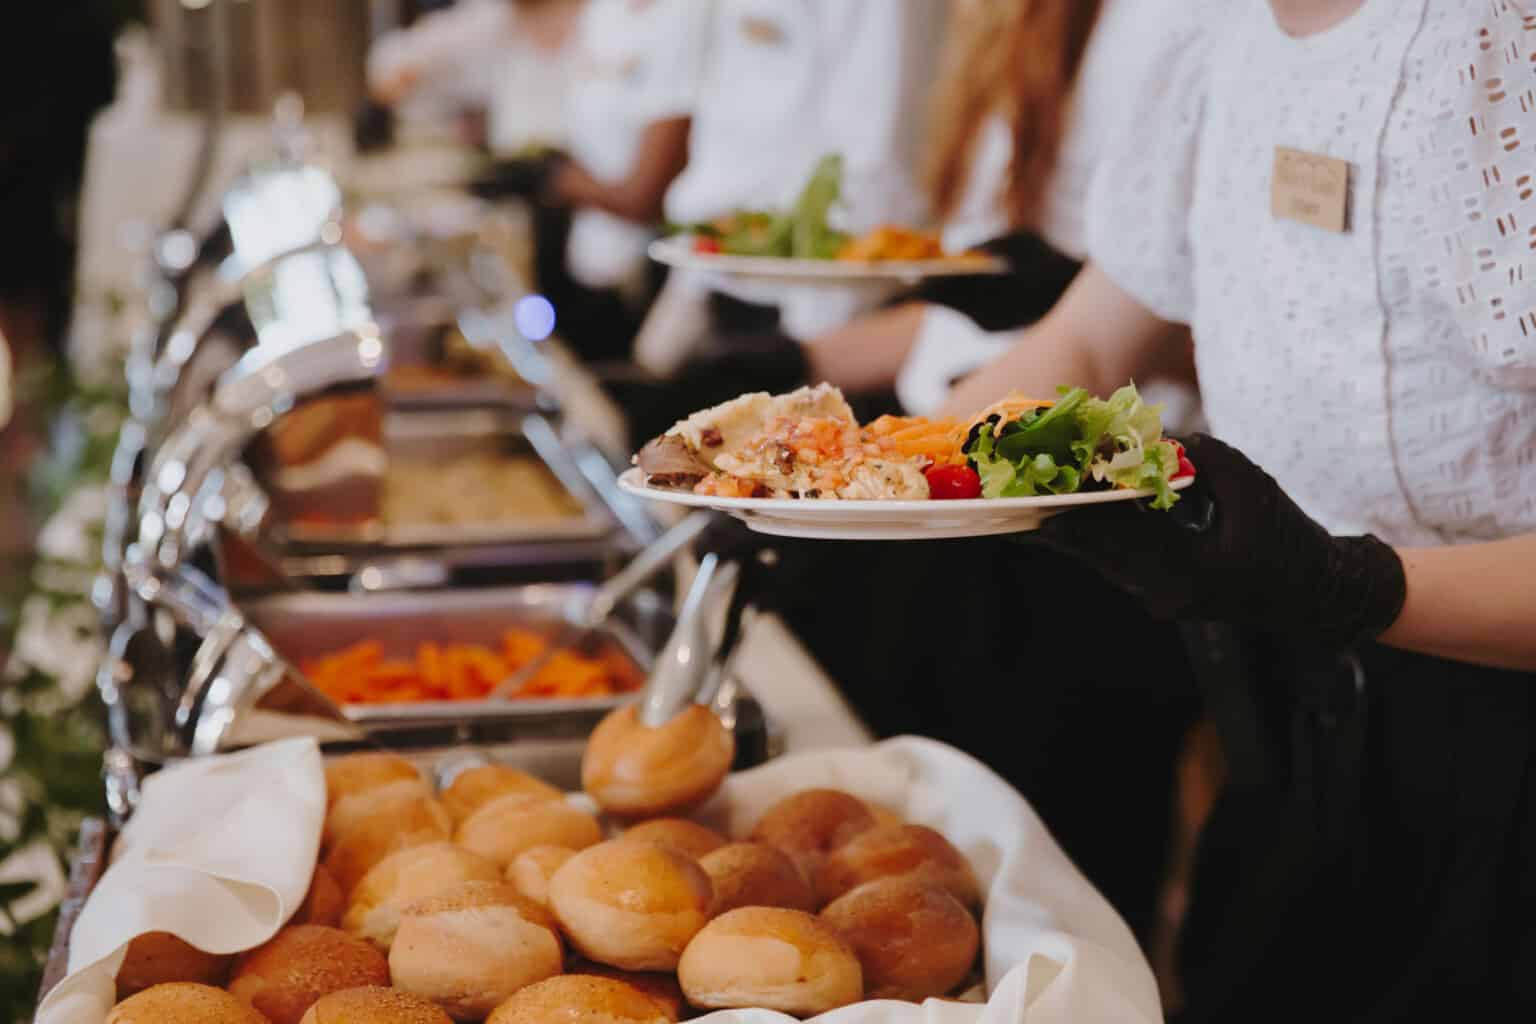 food being served at a buffet.